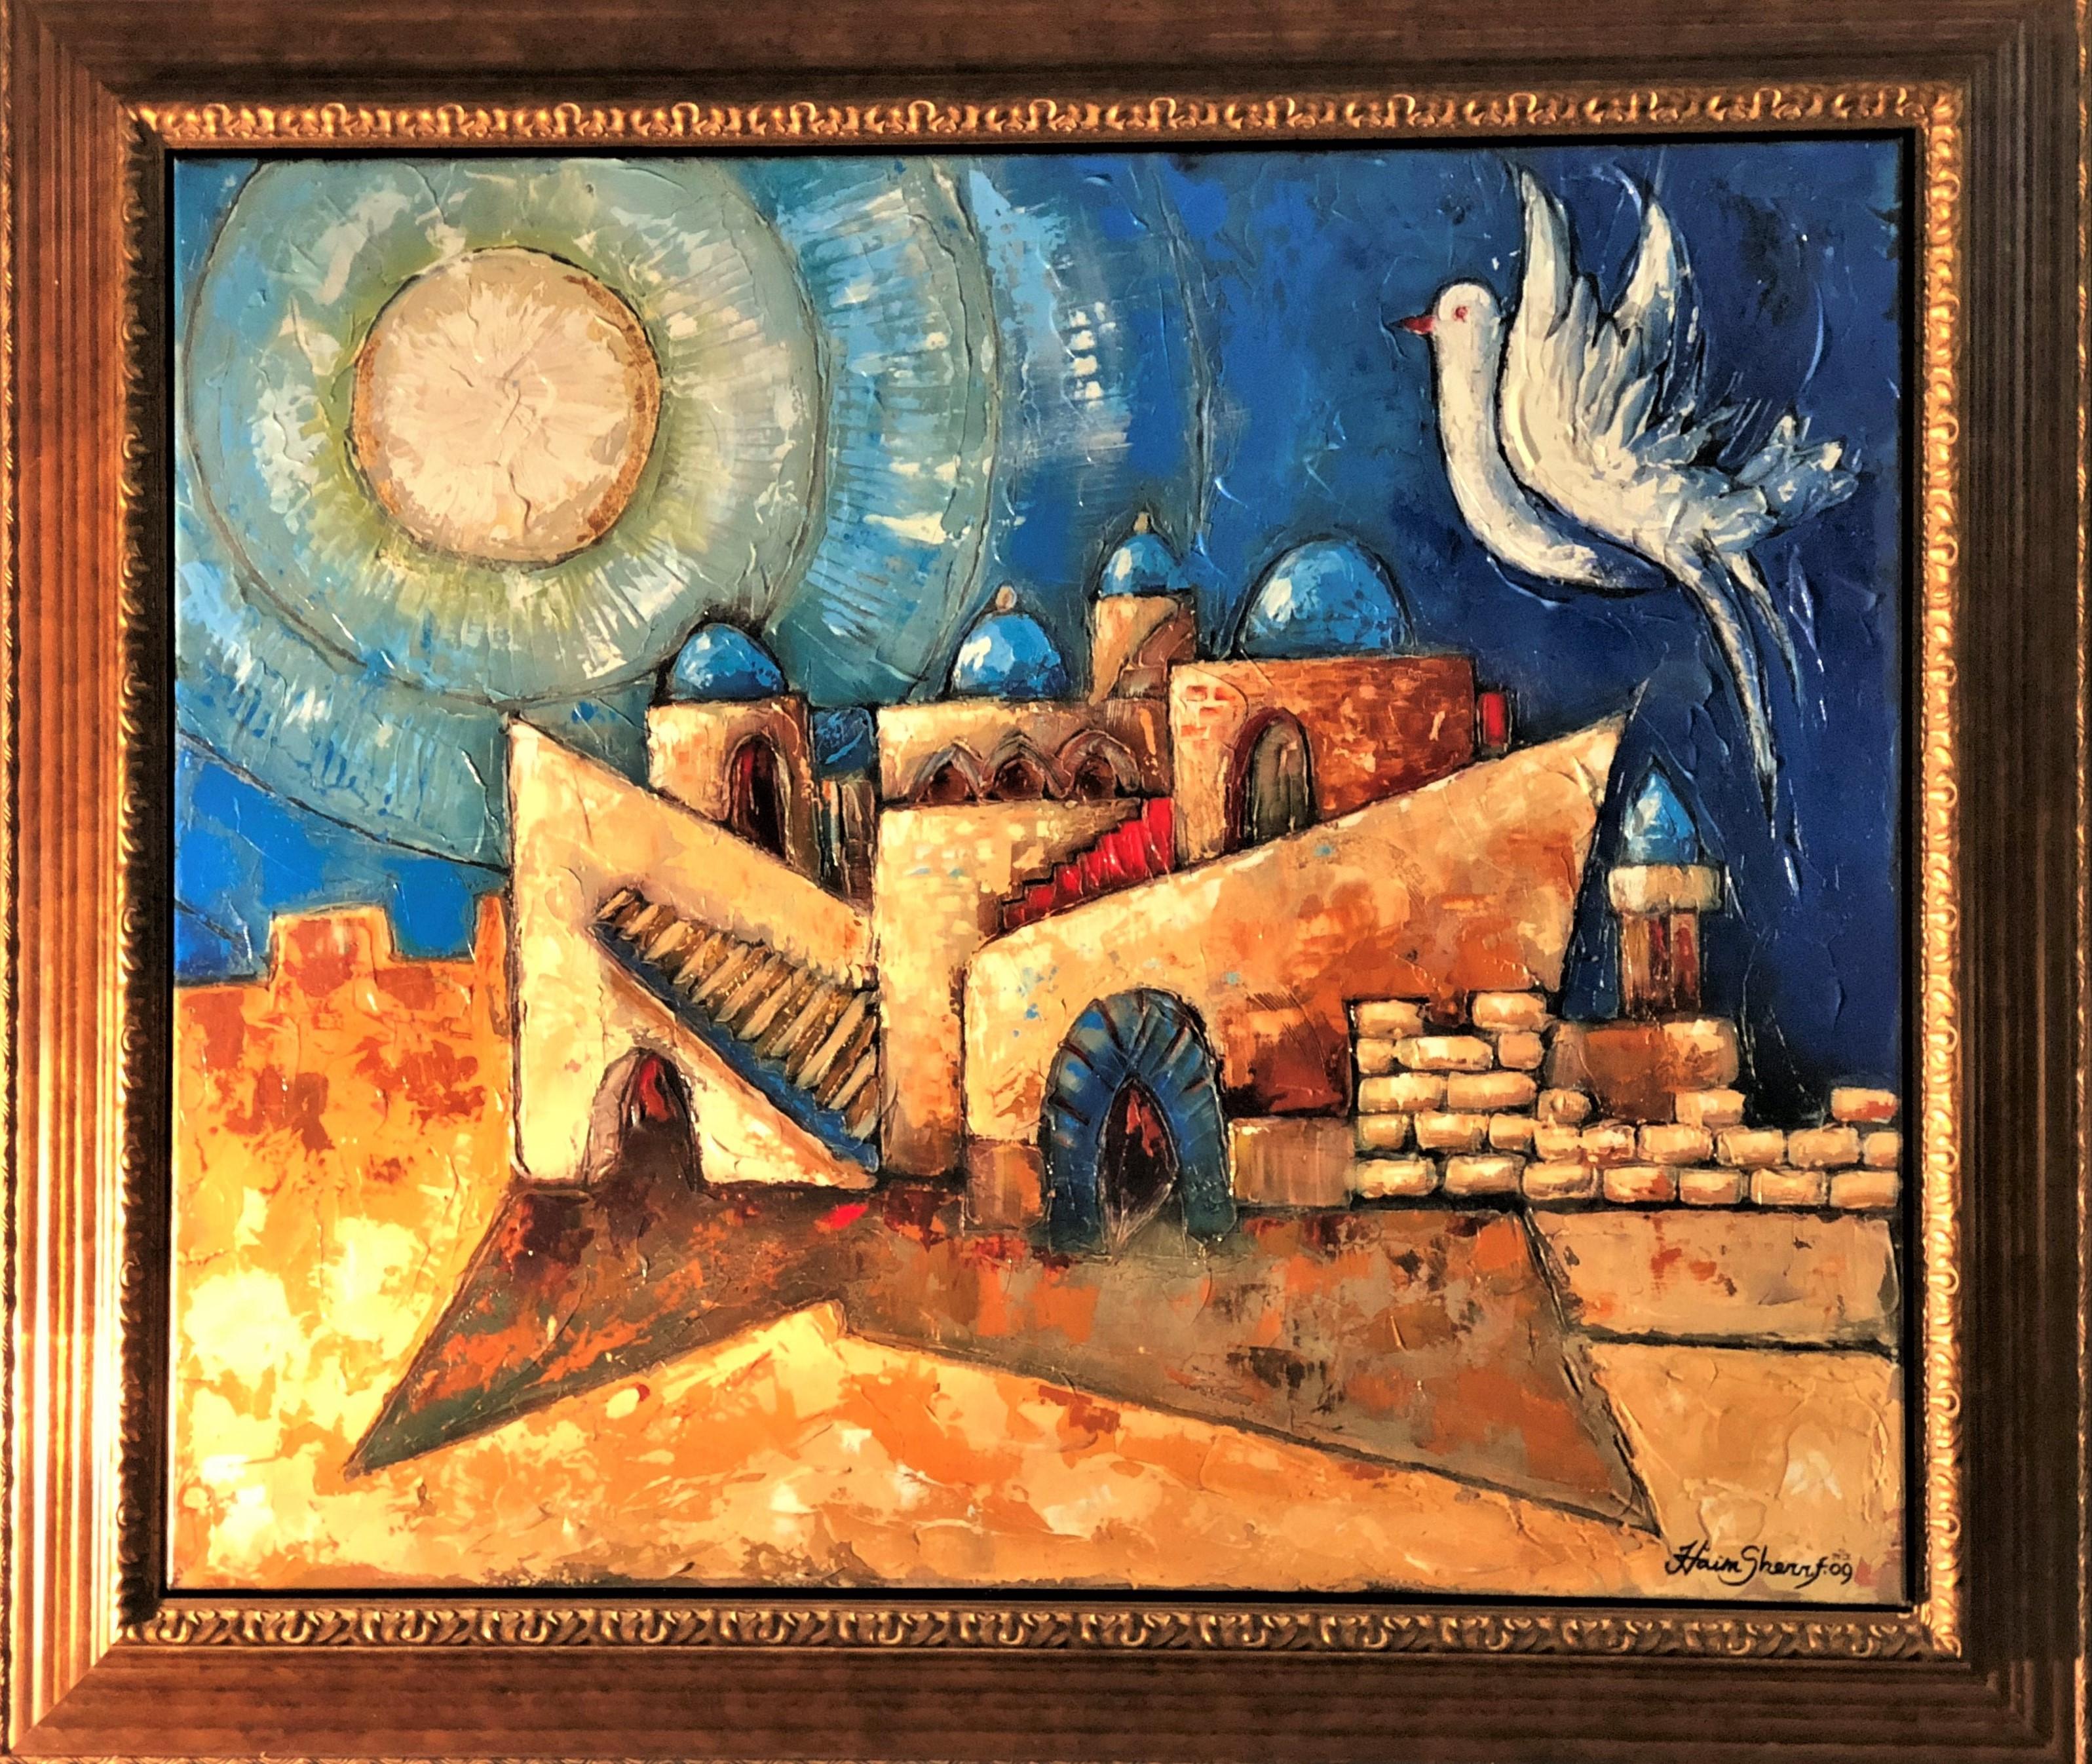 The Golden City - Original Mixed Media on Canvas by Haim Sherrf